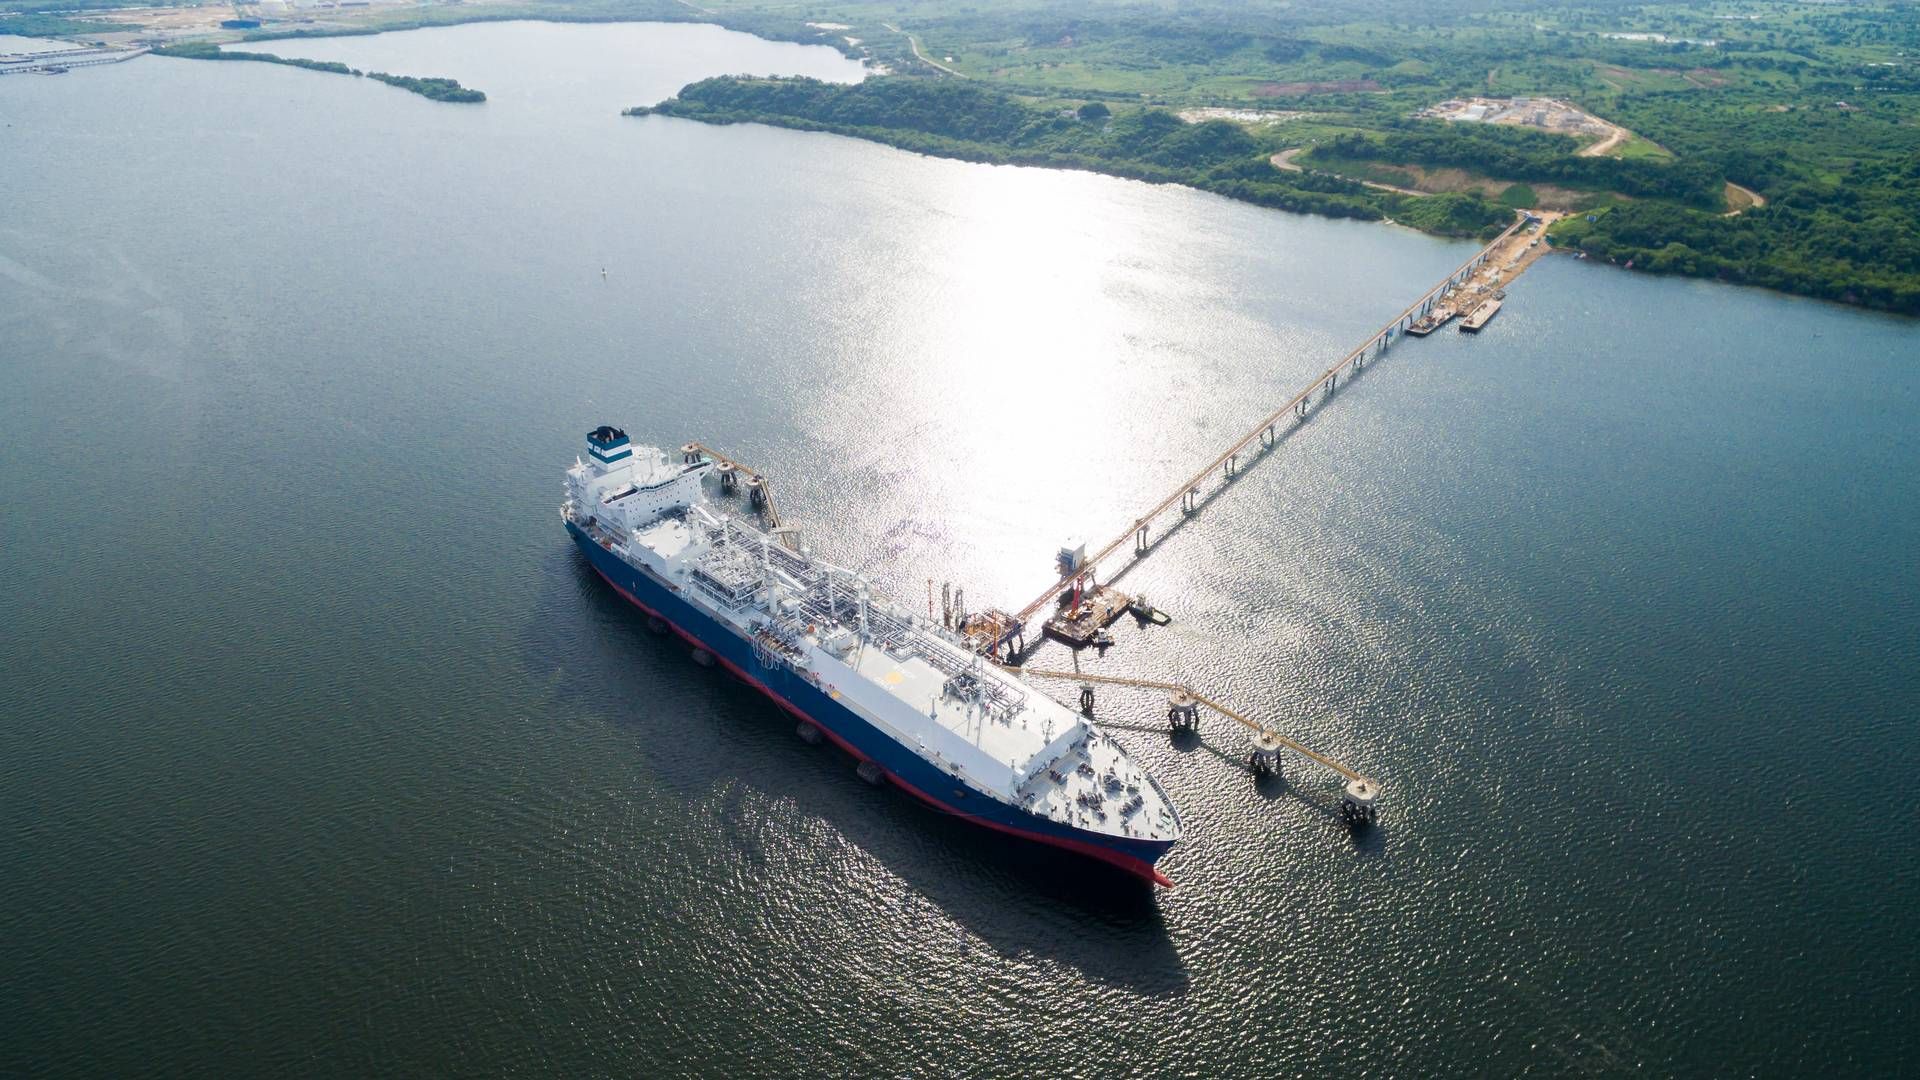 Höeg LNG has developed a so-called ammonia cracker technology used to convert ammonia by splitting it into two elements - nitrogen and hydrogen. | Photo: Höegh LNG